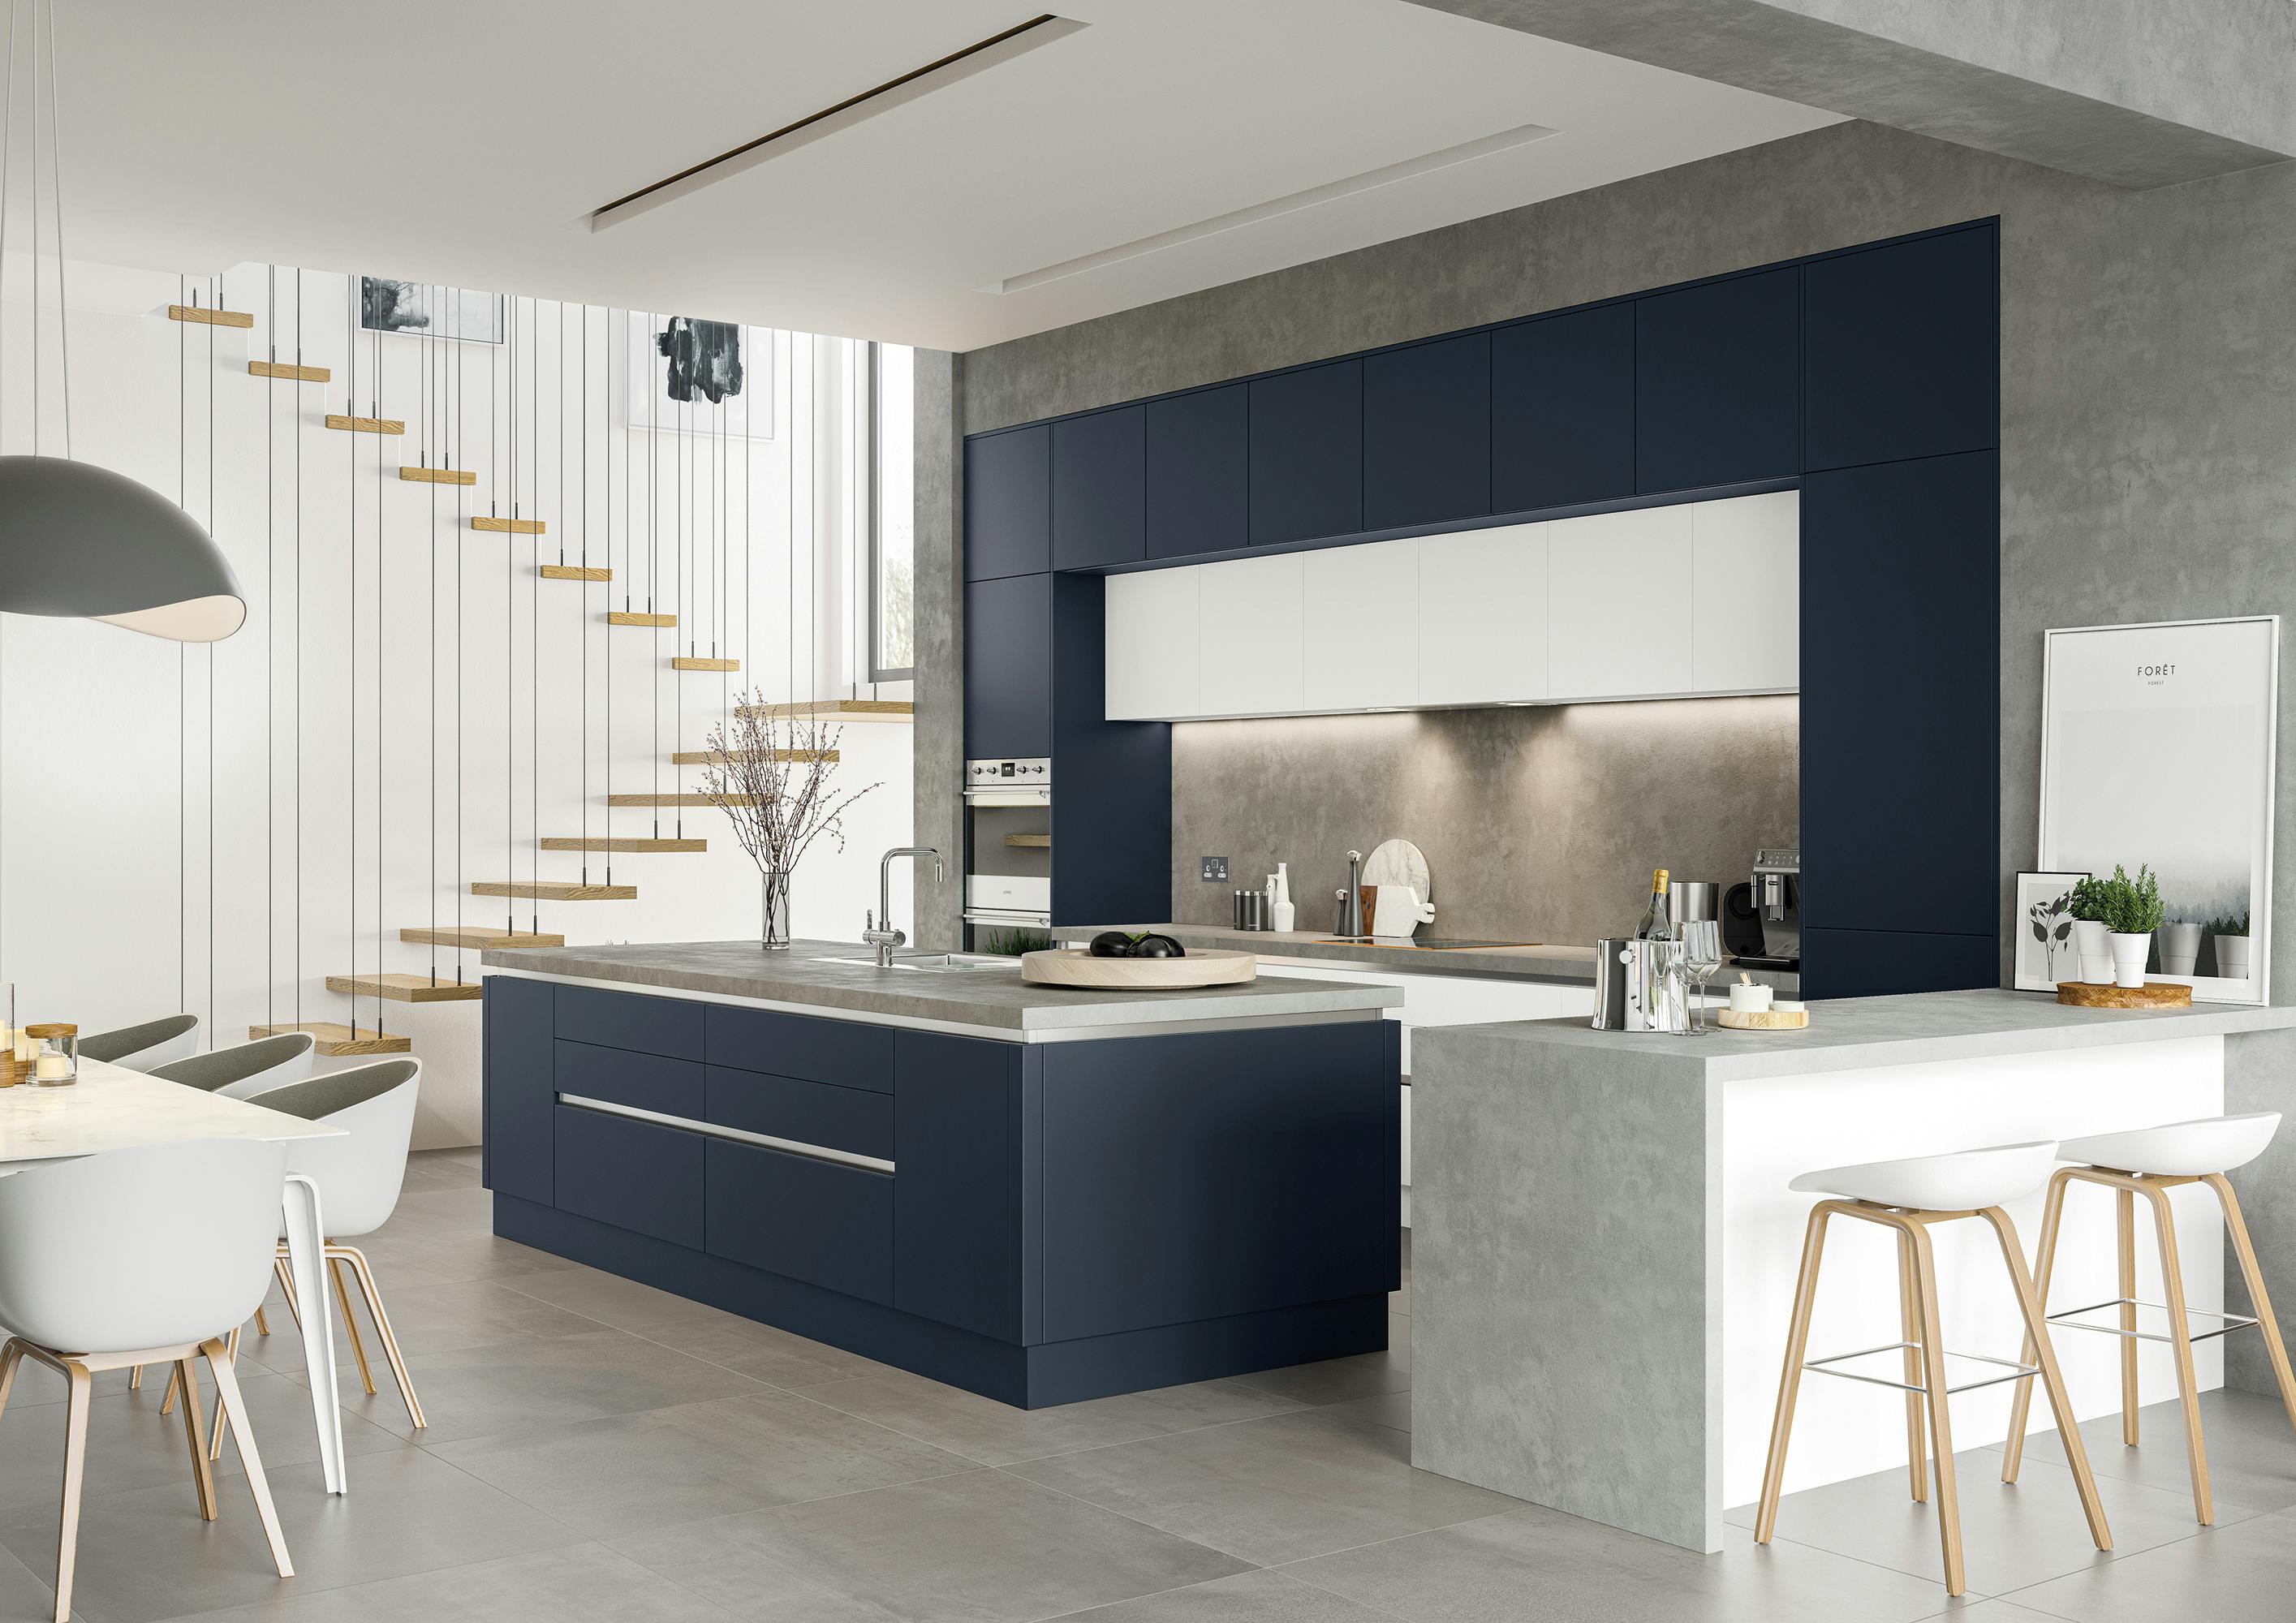 How to choose the right Handleless Kitchen